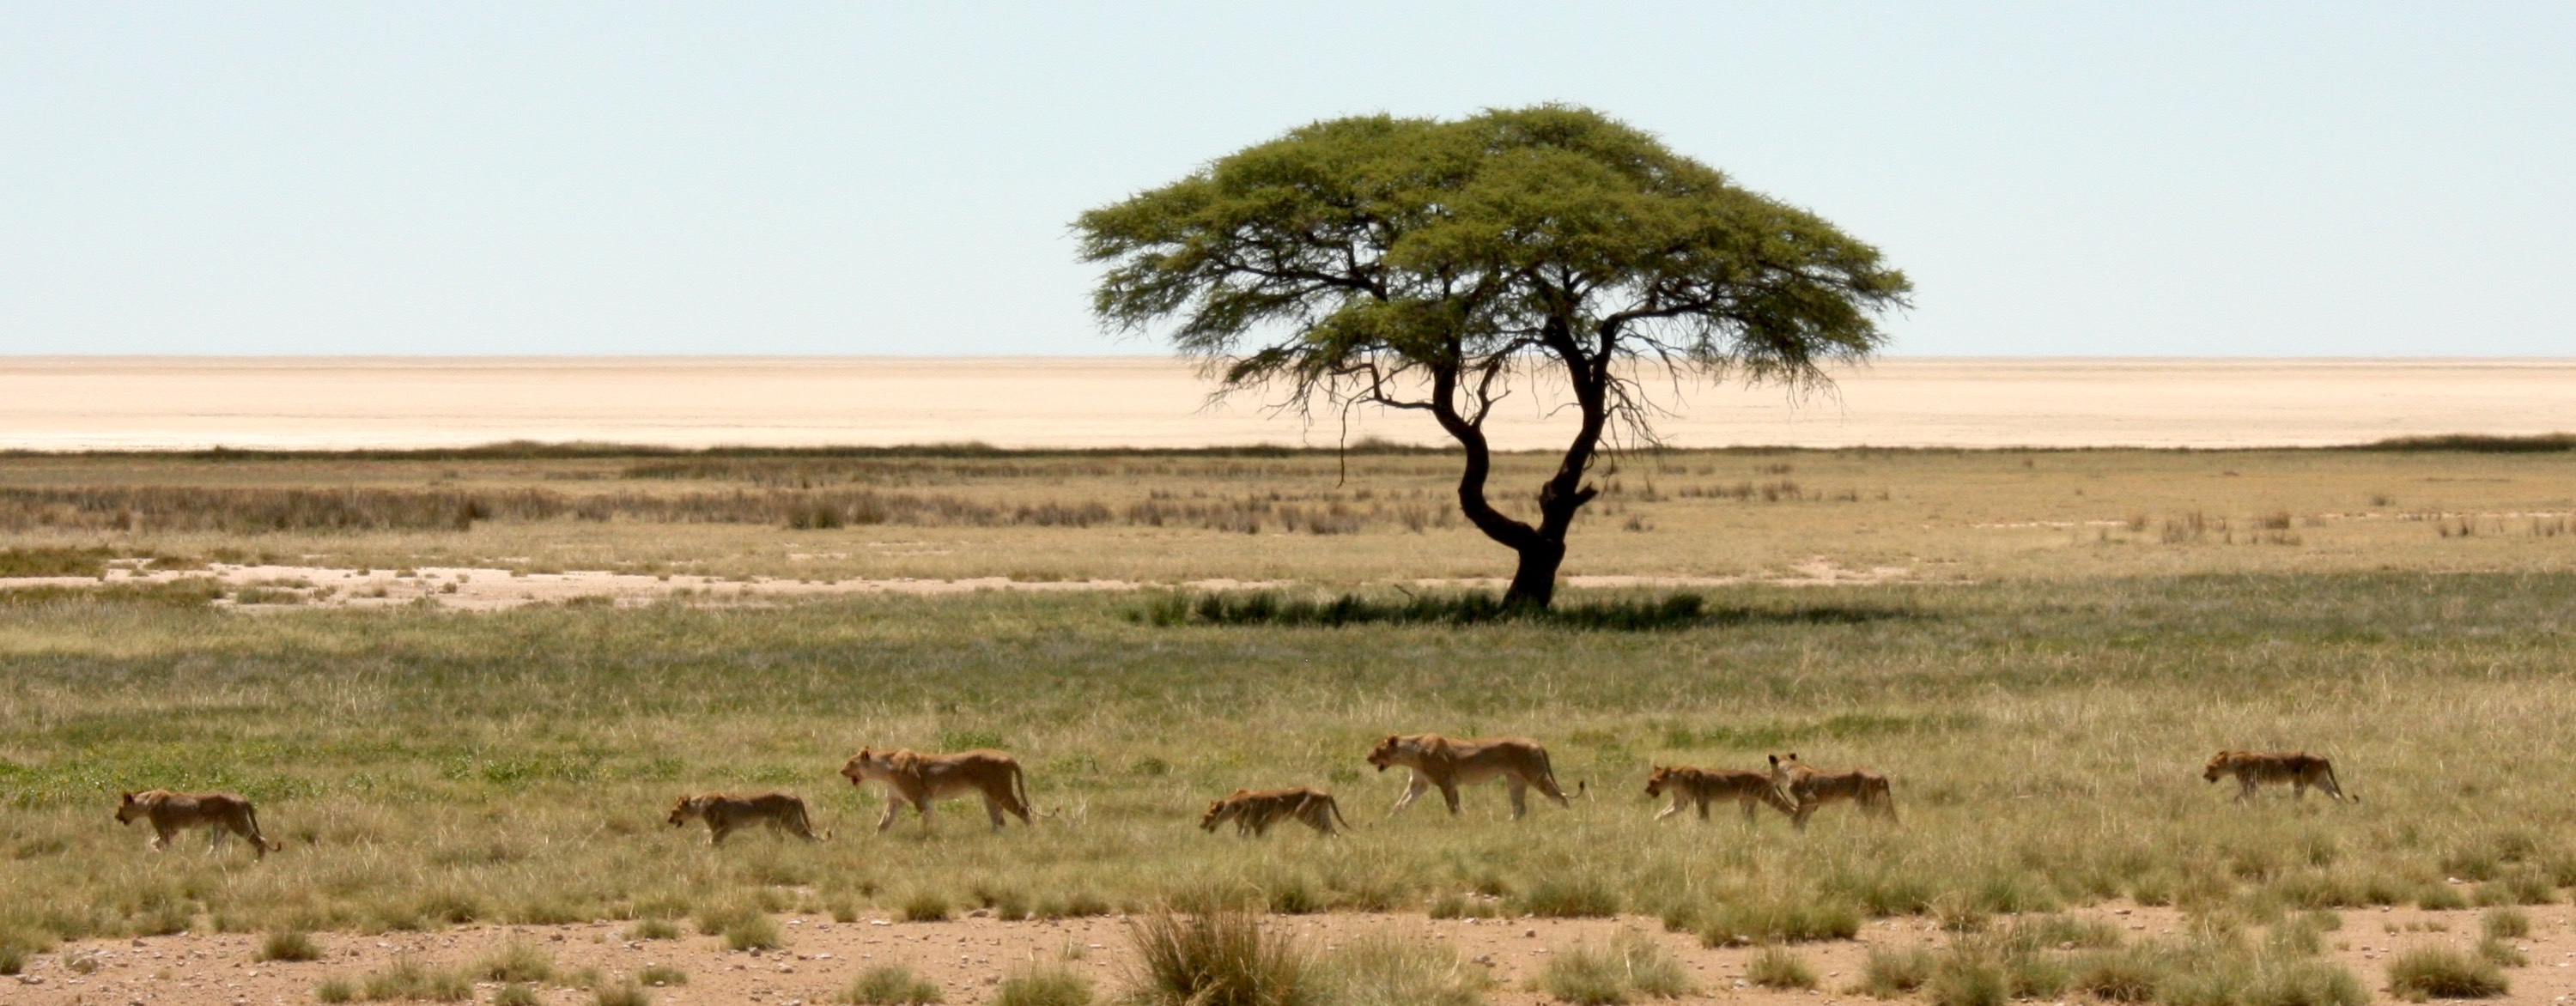 A pride of lions walks across open grassland with a single tree behind them and the Etosha pan in the background.